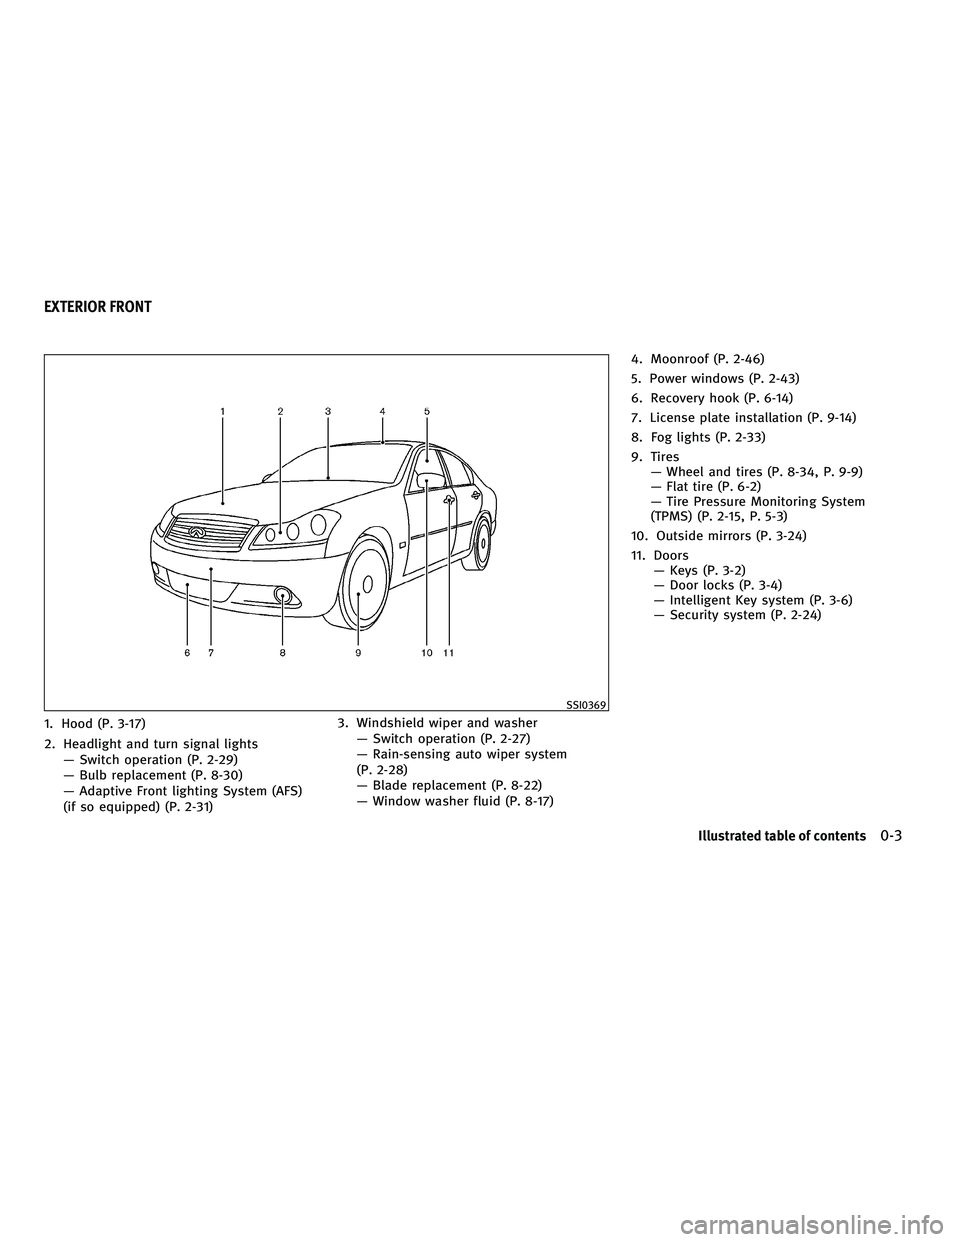 INFINITI M 2010  Owners Manual 1. Hood (P. 3-17)
2. Headlight and turn signal lightsÐ Switch operation (P. 2-29)
Ð Bulb replacement (P. 8-30)
Ð Adaptive Front lighting System (AFS)
(if so equipped) (P. 2-31) 3. Windshield wiper 